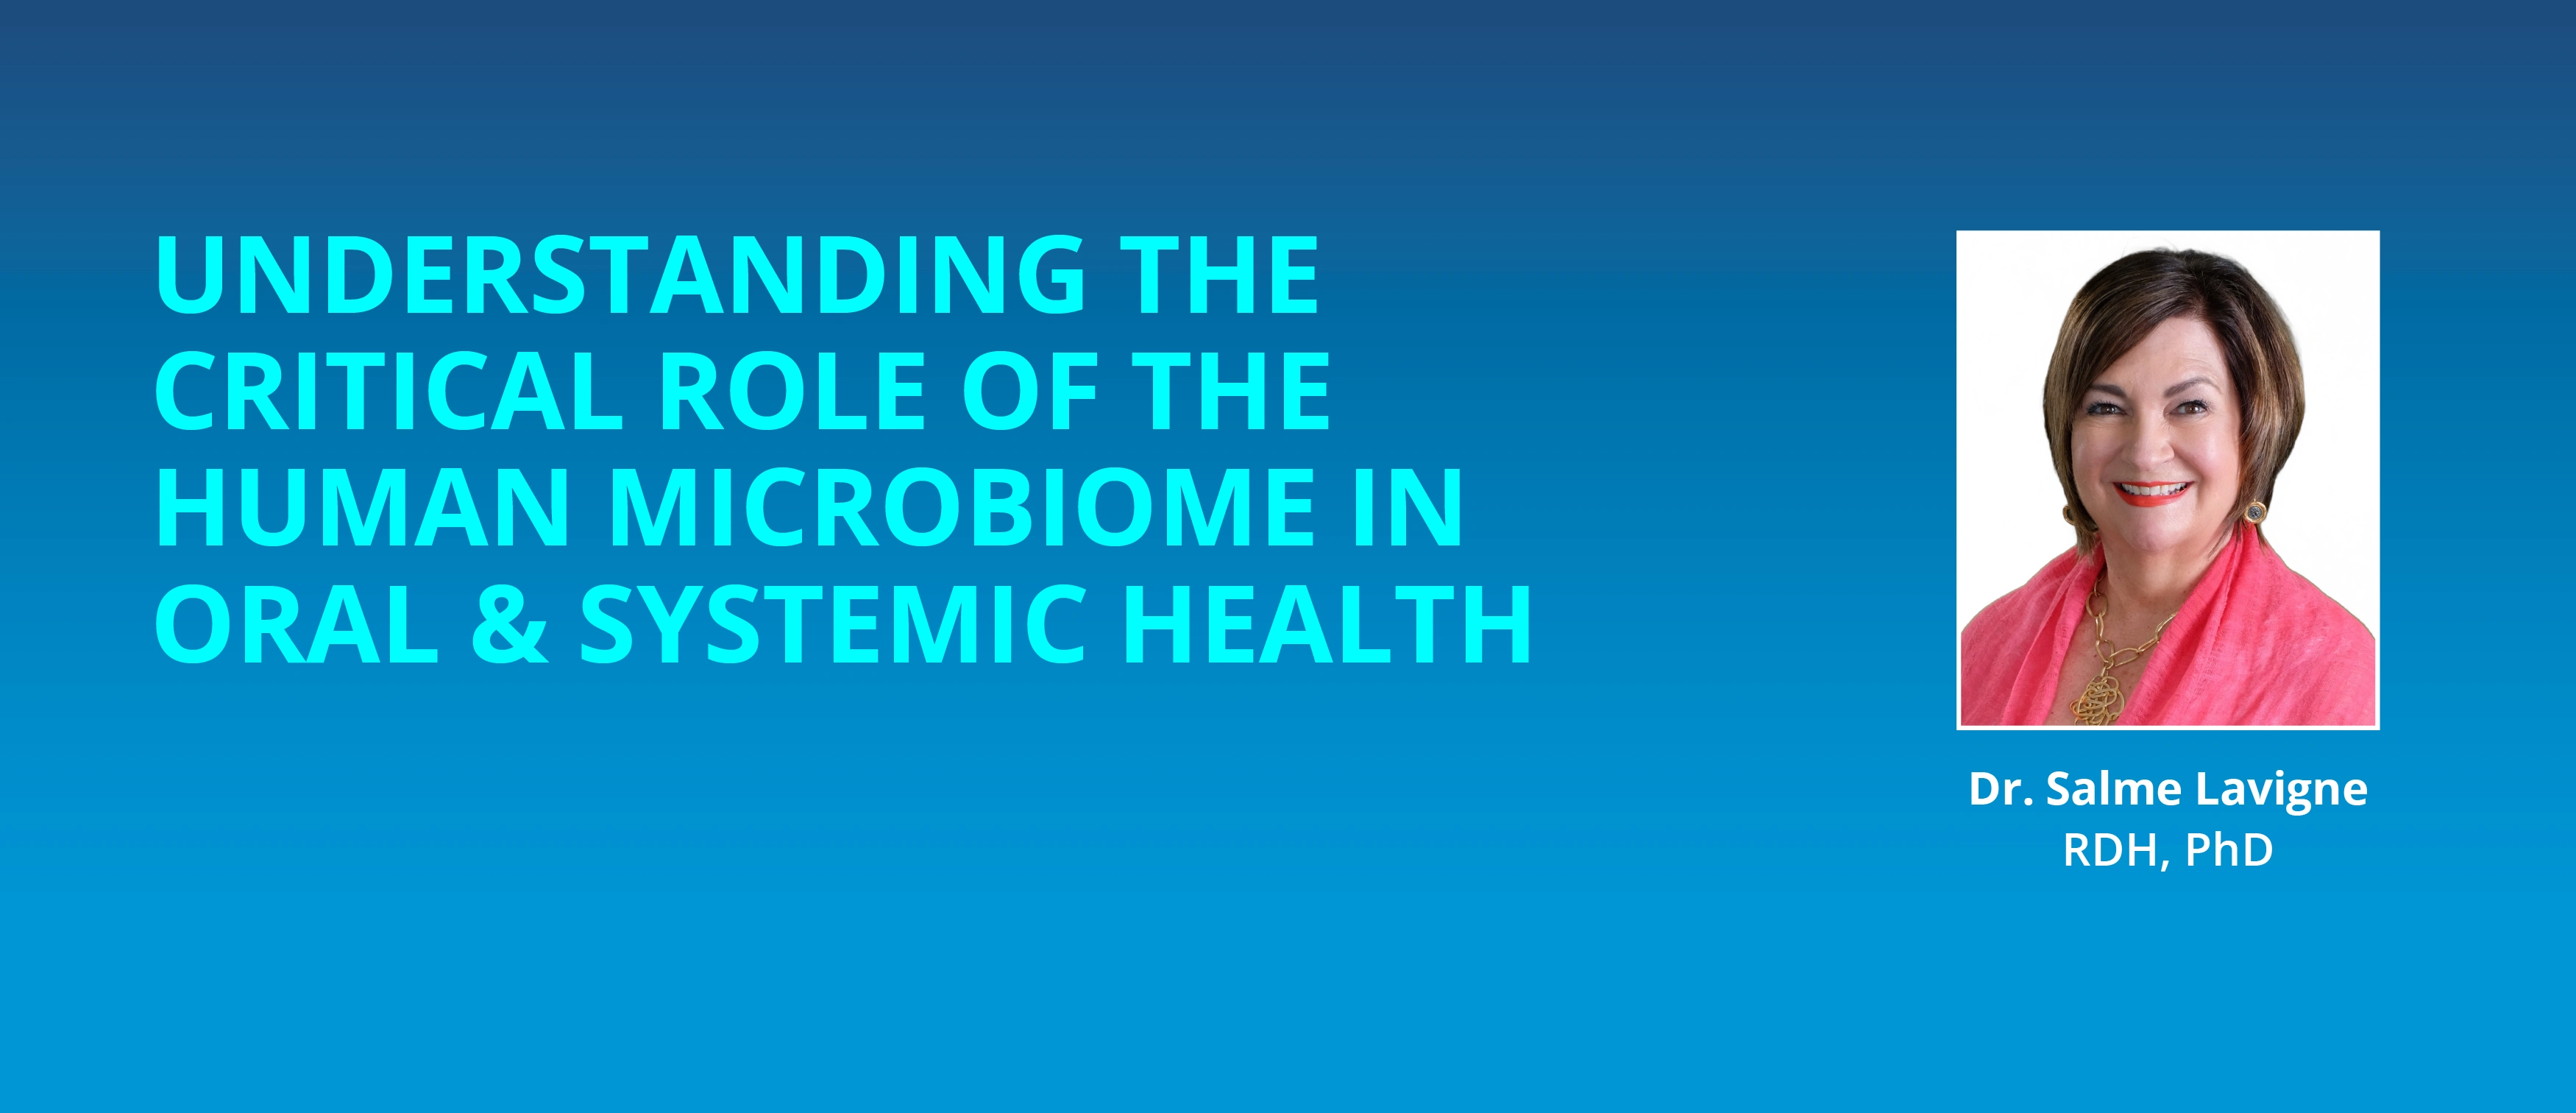 Understanding The Critical Role Of The Human Microbiome In Oral